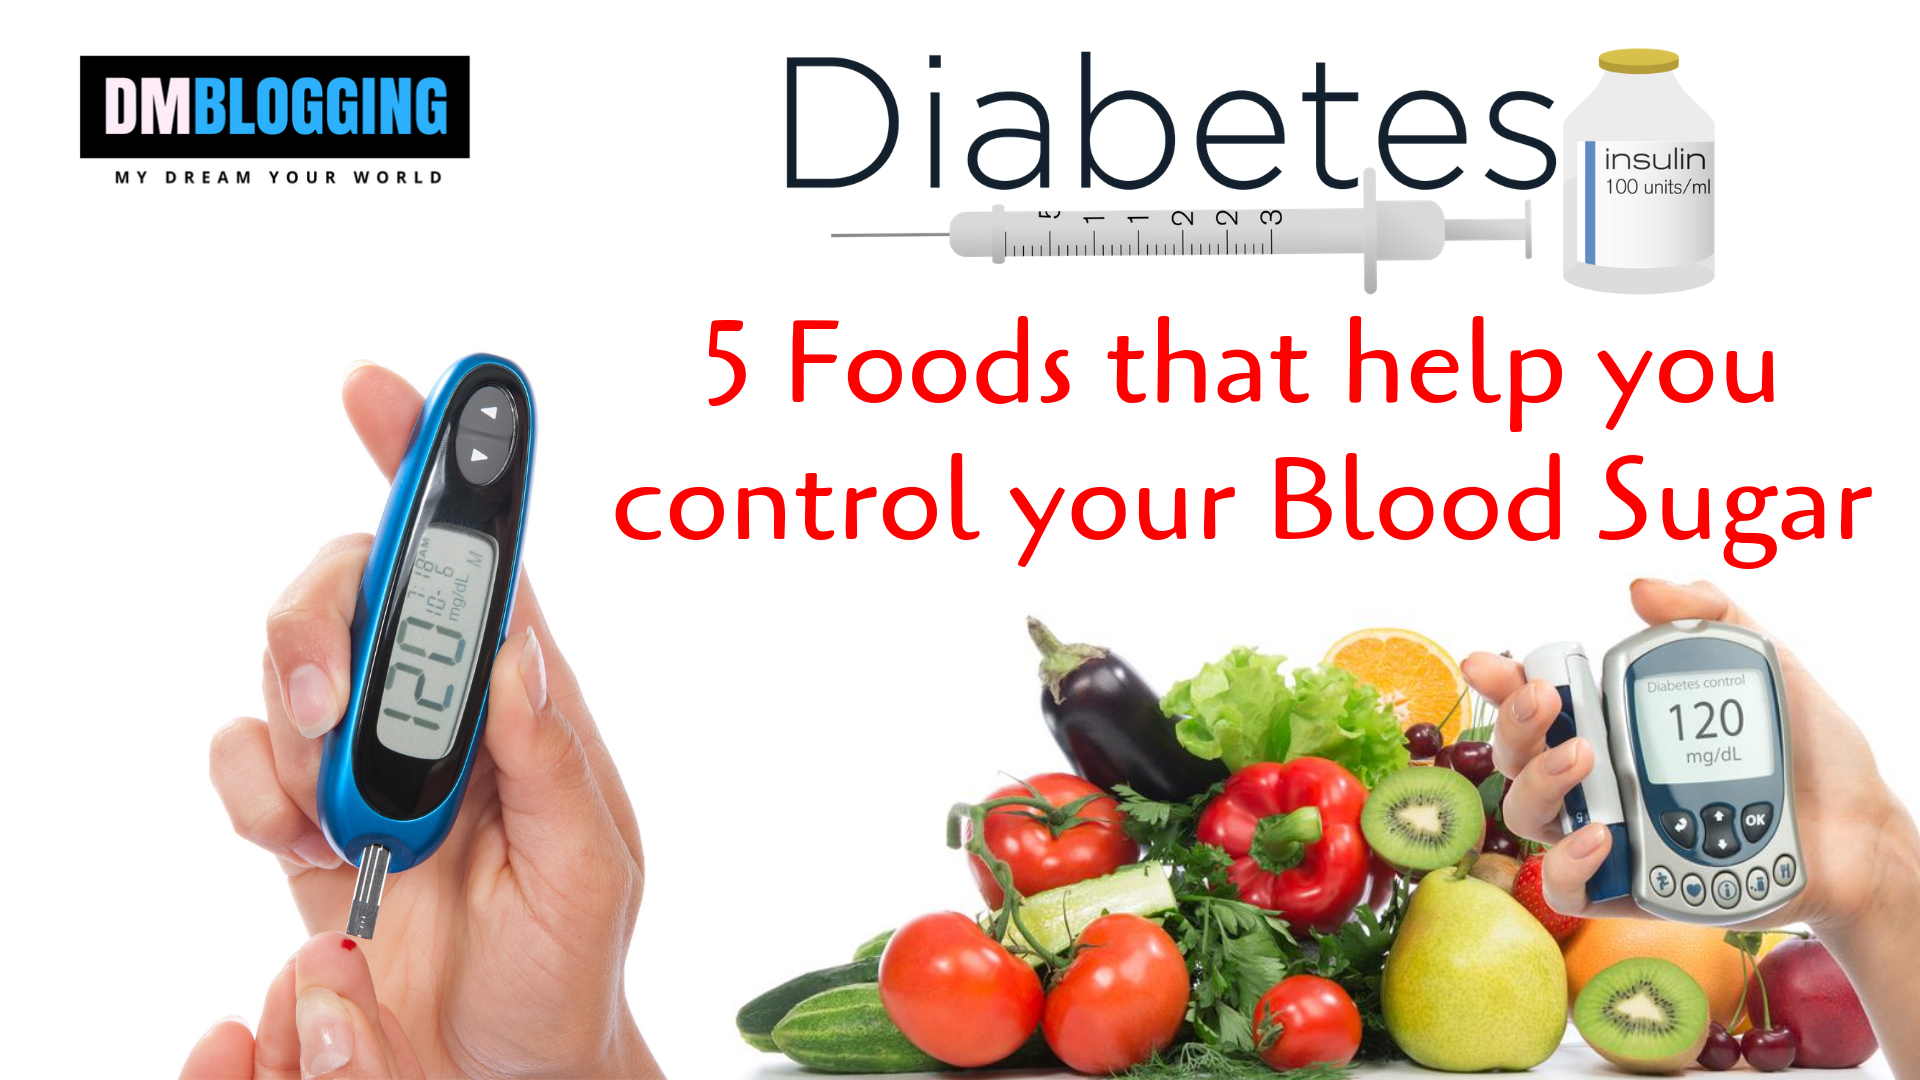 Diabetes &  Diet: 5 Foods that help you control your Blood Sugar